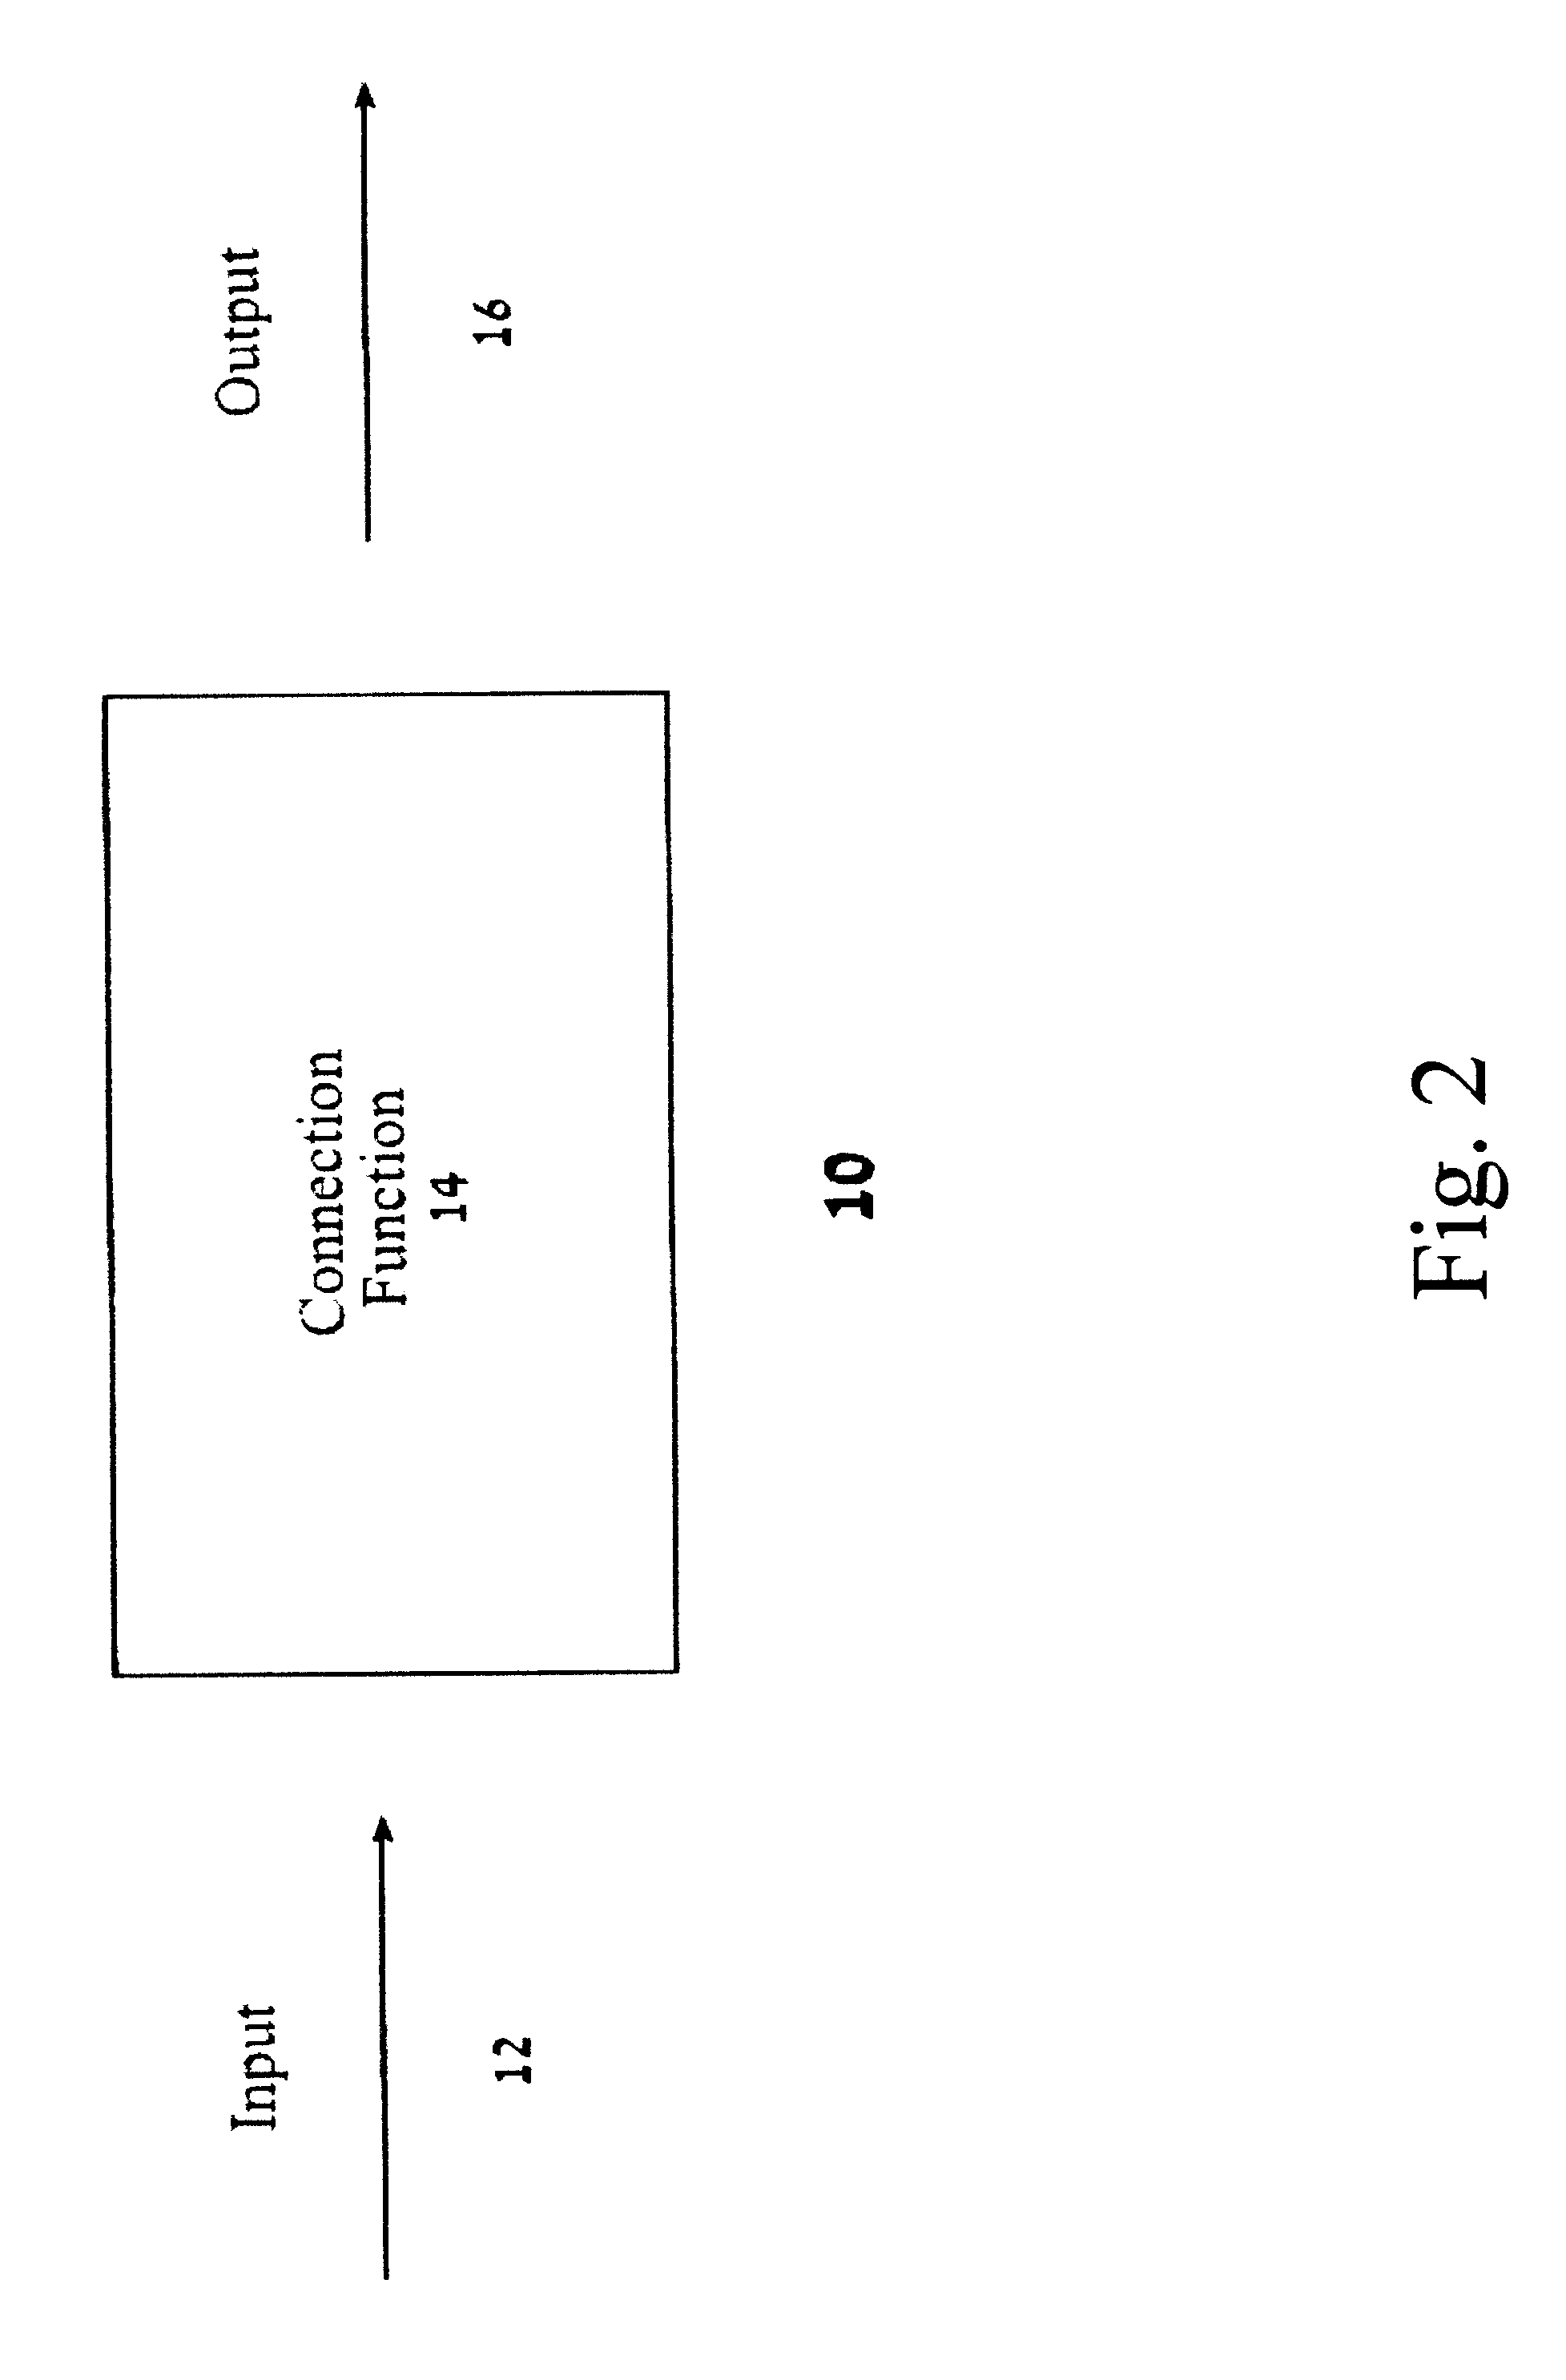 Method and system for system identification of physiological systems